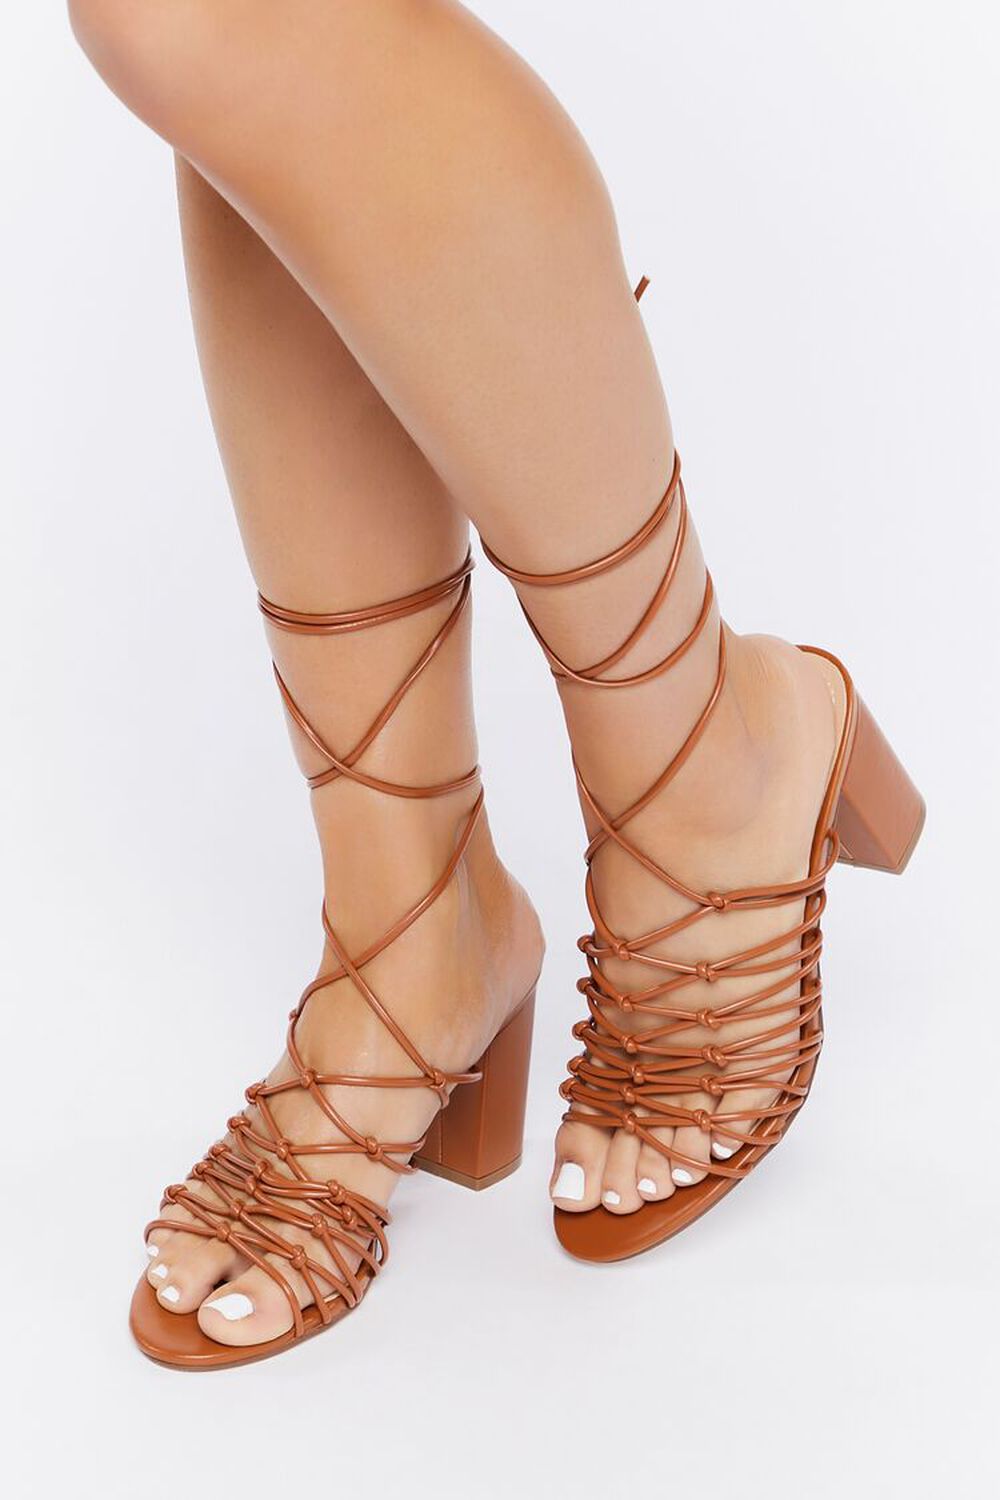 TAN Faux Leather Lace-Up Heels, image 1